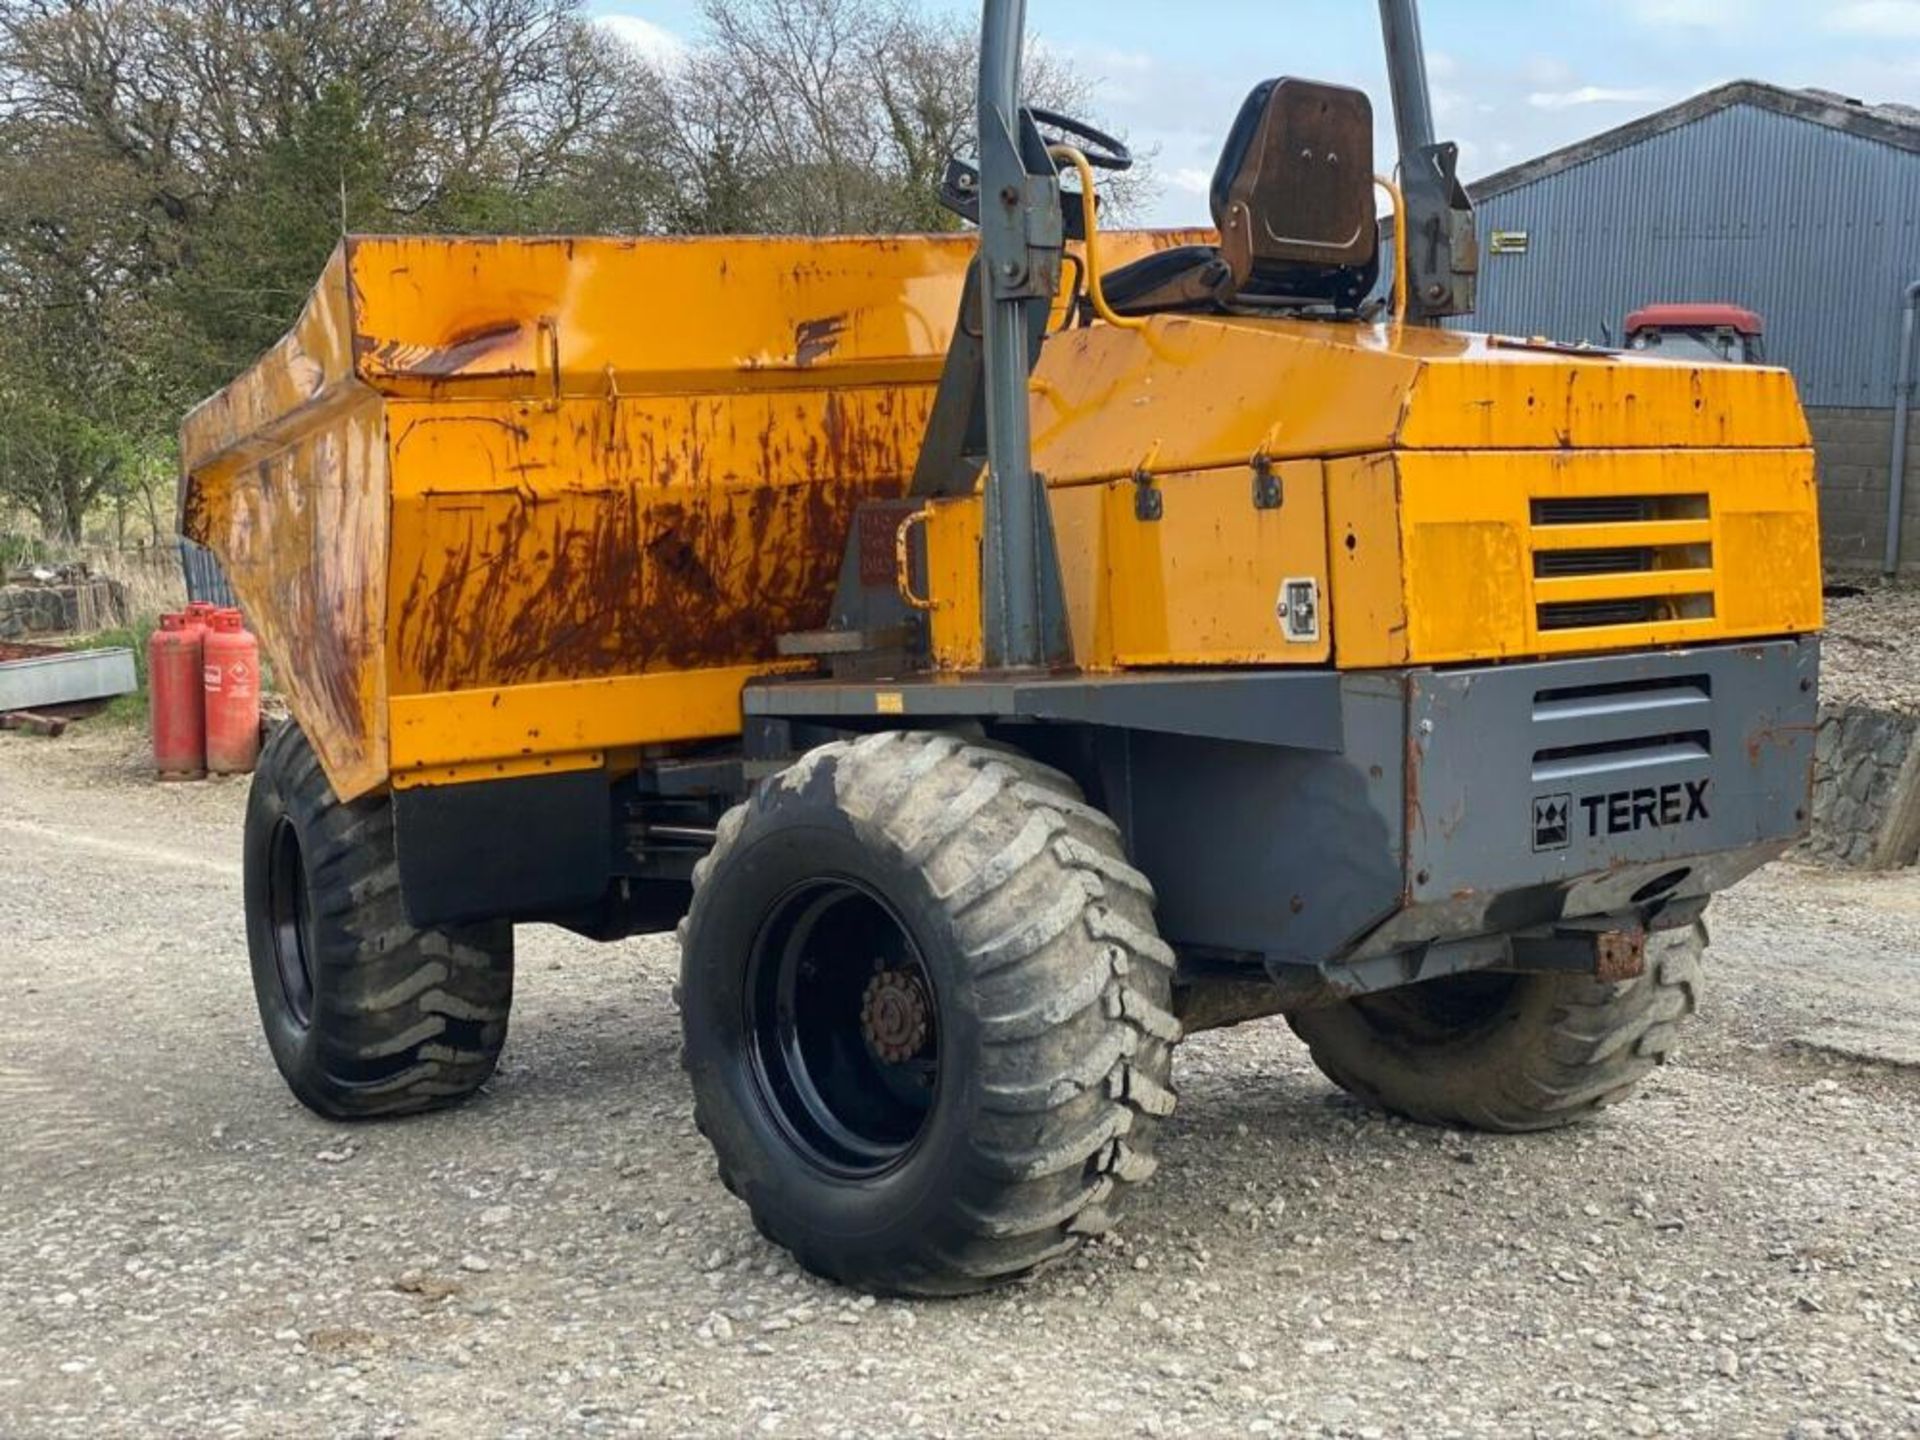 POWERFUL PERFORMANCE: 2009 TEREX TA9 9-TON DUMPER READY FOR ACTION